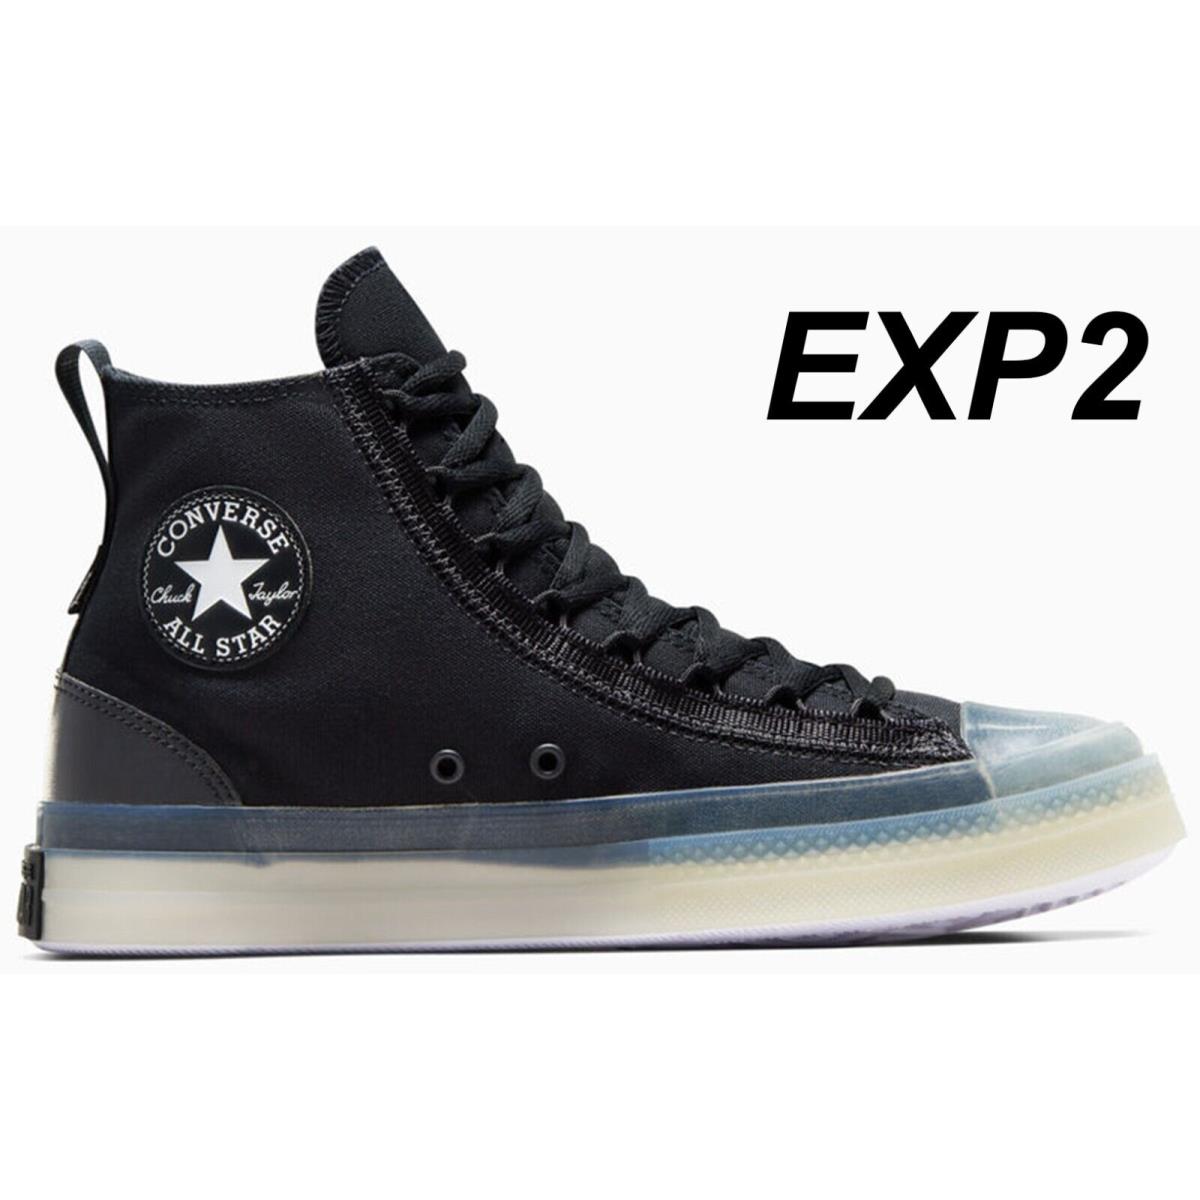 Converse Chuck Taylor All Star CX EXP2 High Top Shoes Limited Edition Black